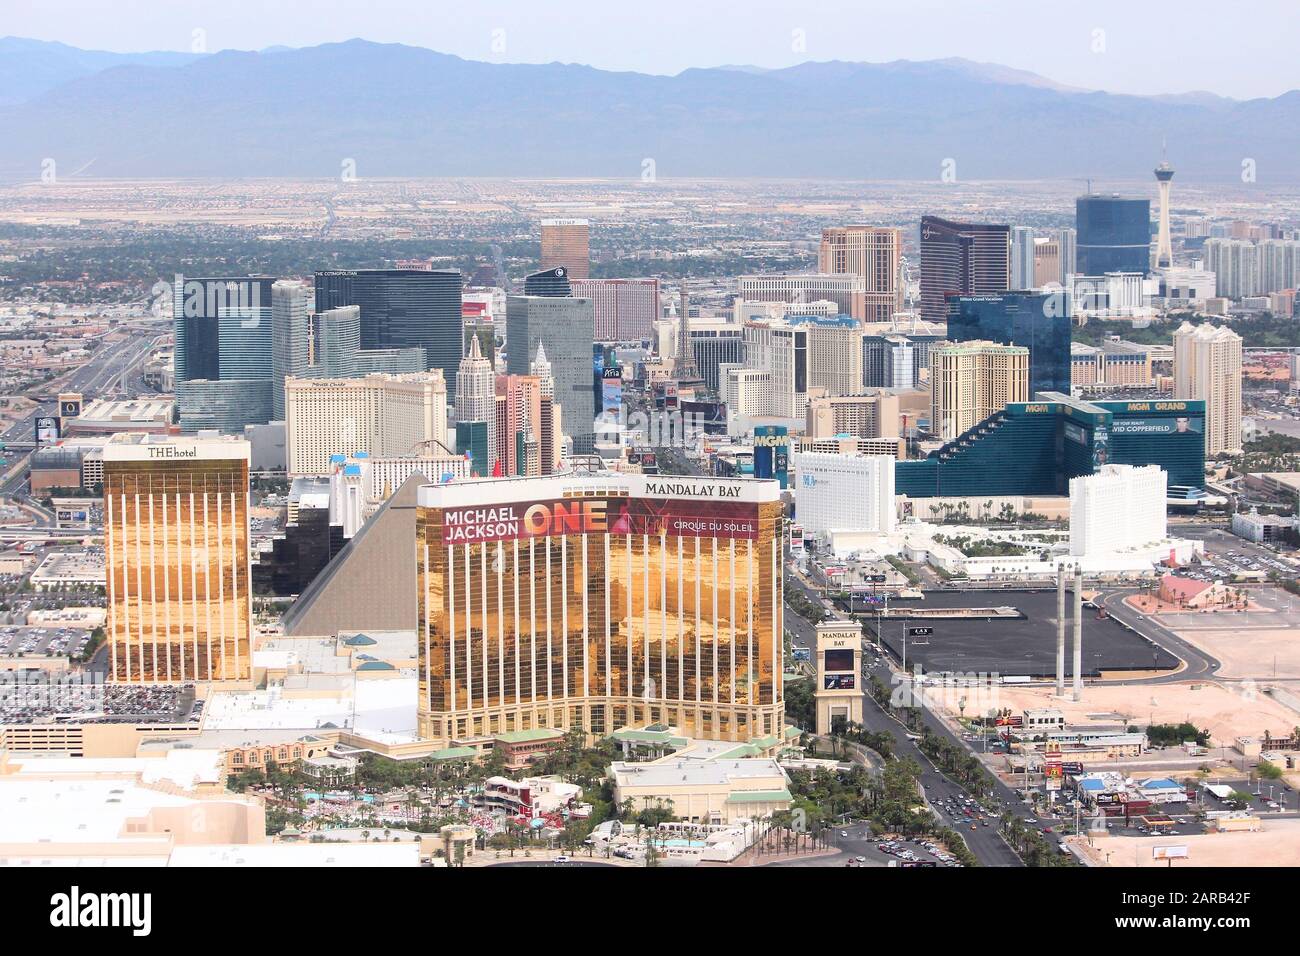 LAS VEGAS, USA - APRIL 15, 2014: Aerial view of The Strip casinos in Las Vegas. Among 25 largest hotels in the world, 15 are located on Las Vegas Stri Stock Photo